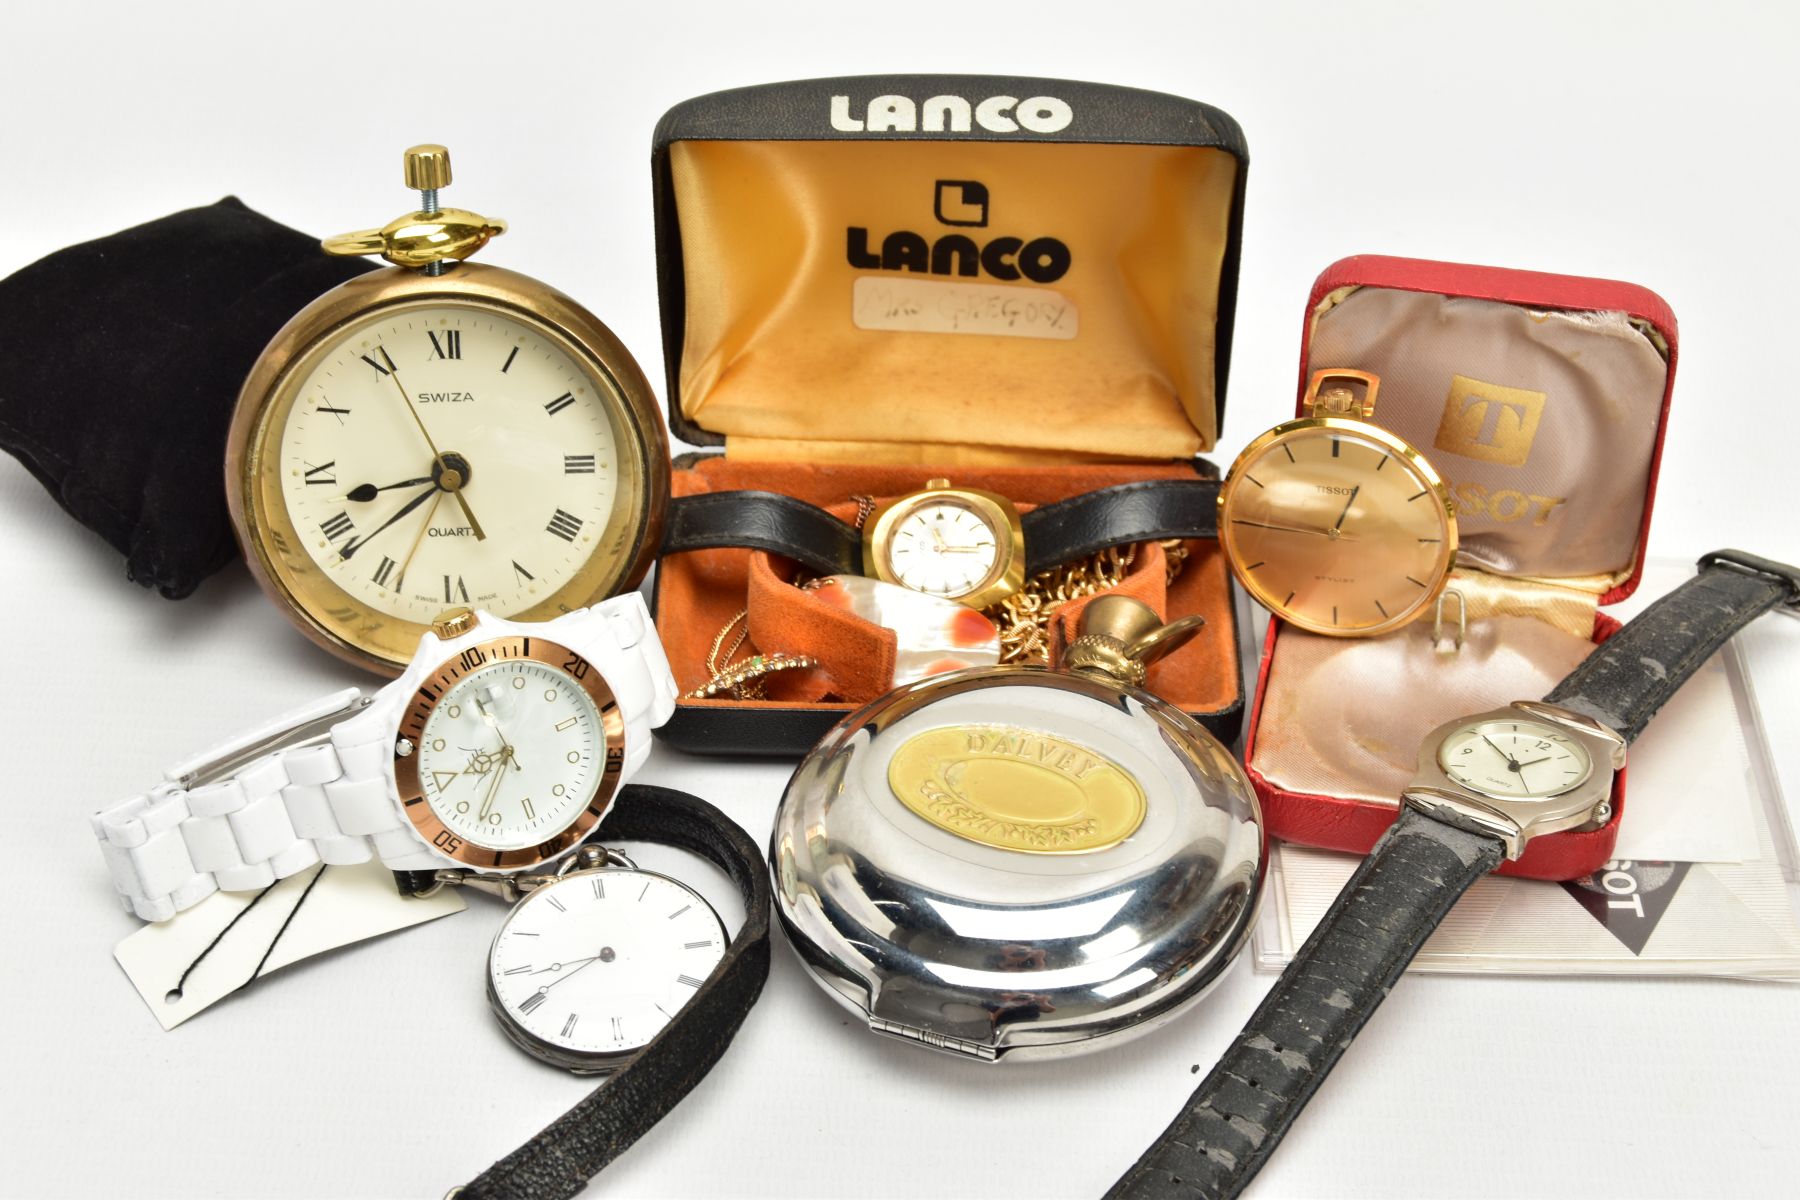 A TISSOT POCKET WATCH AND OTHER ASSORTED ITEMS, a hand wound open face pocket watch, round gold tone